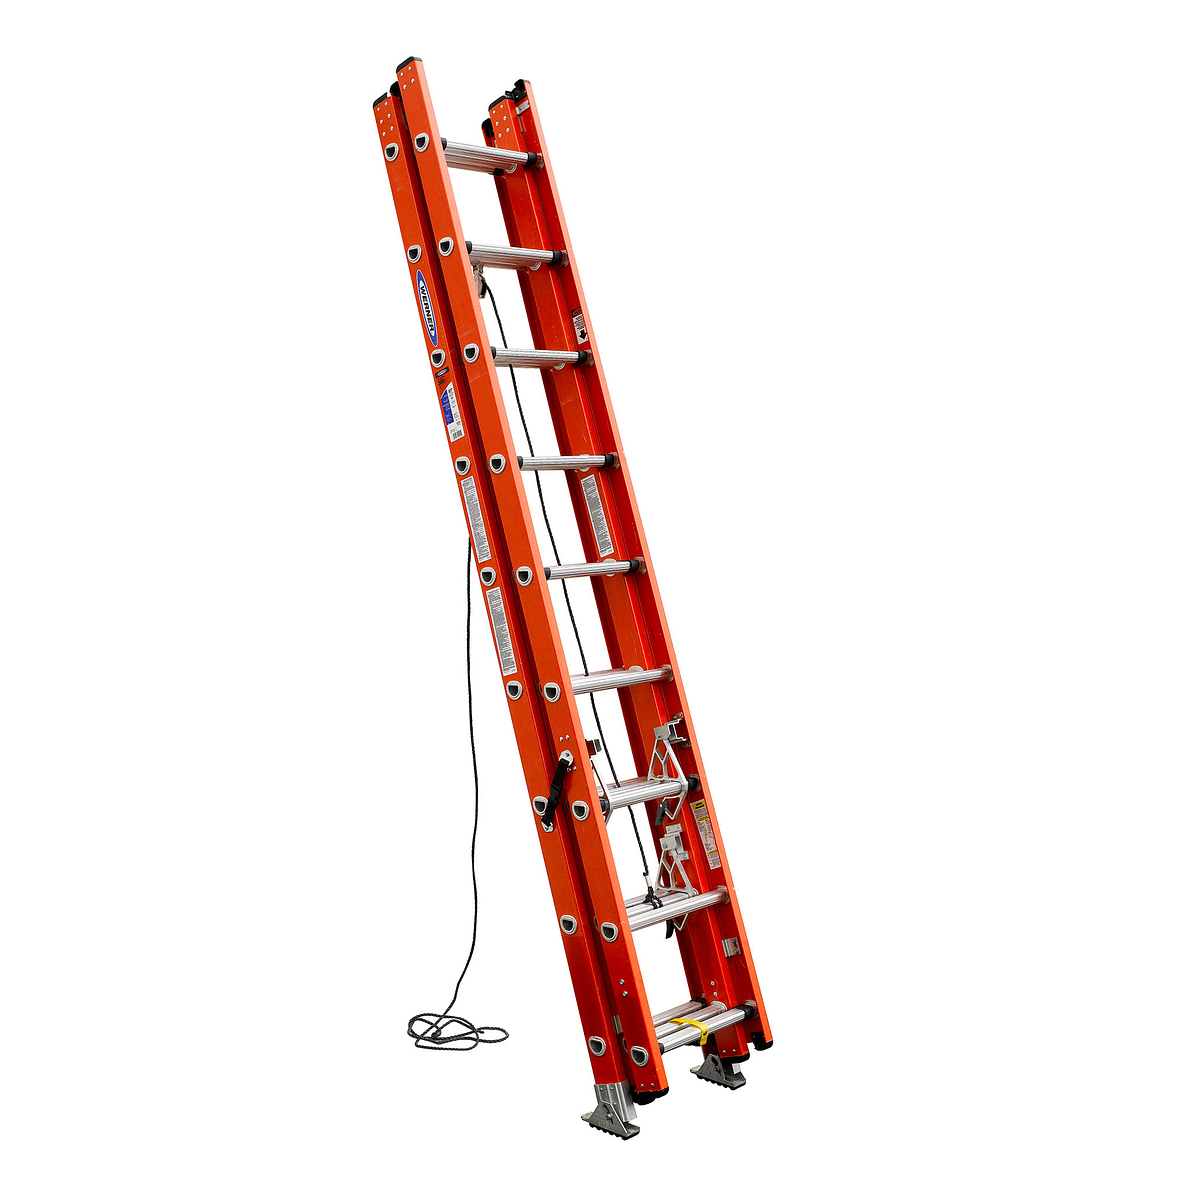 Featured image for “Extension Ladder 24’”